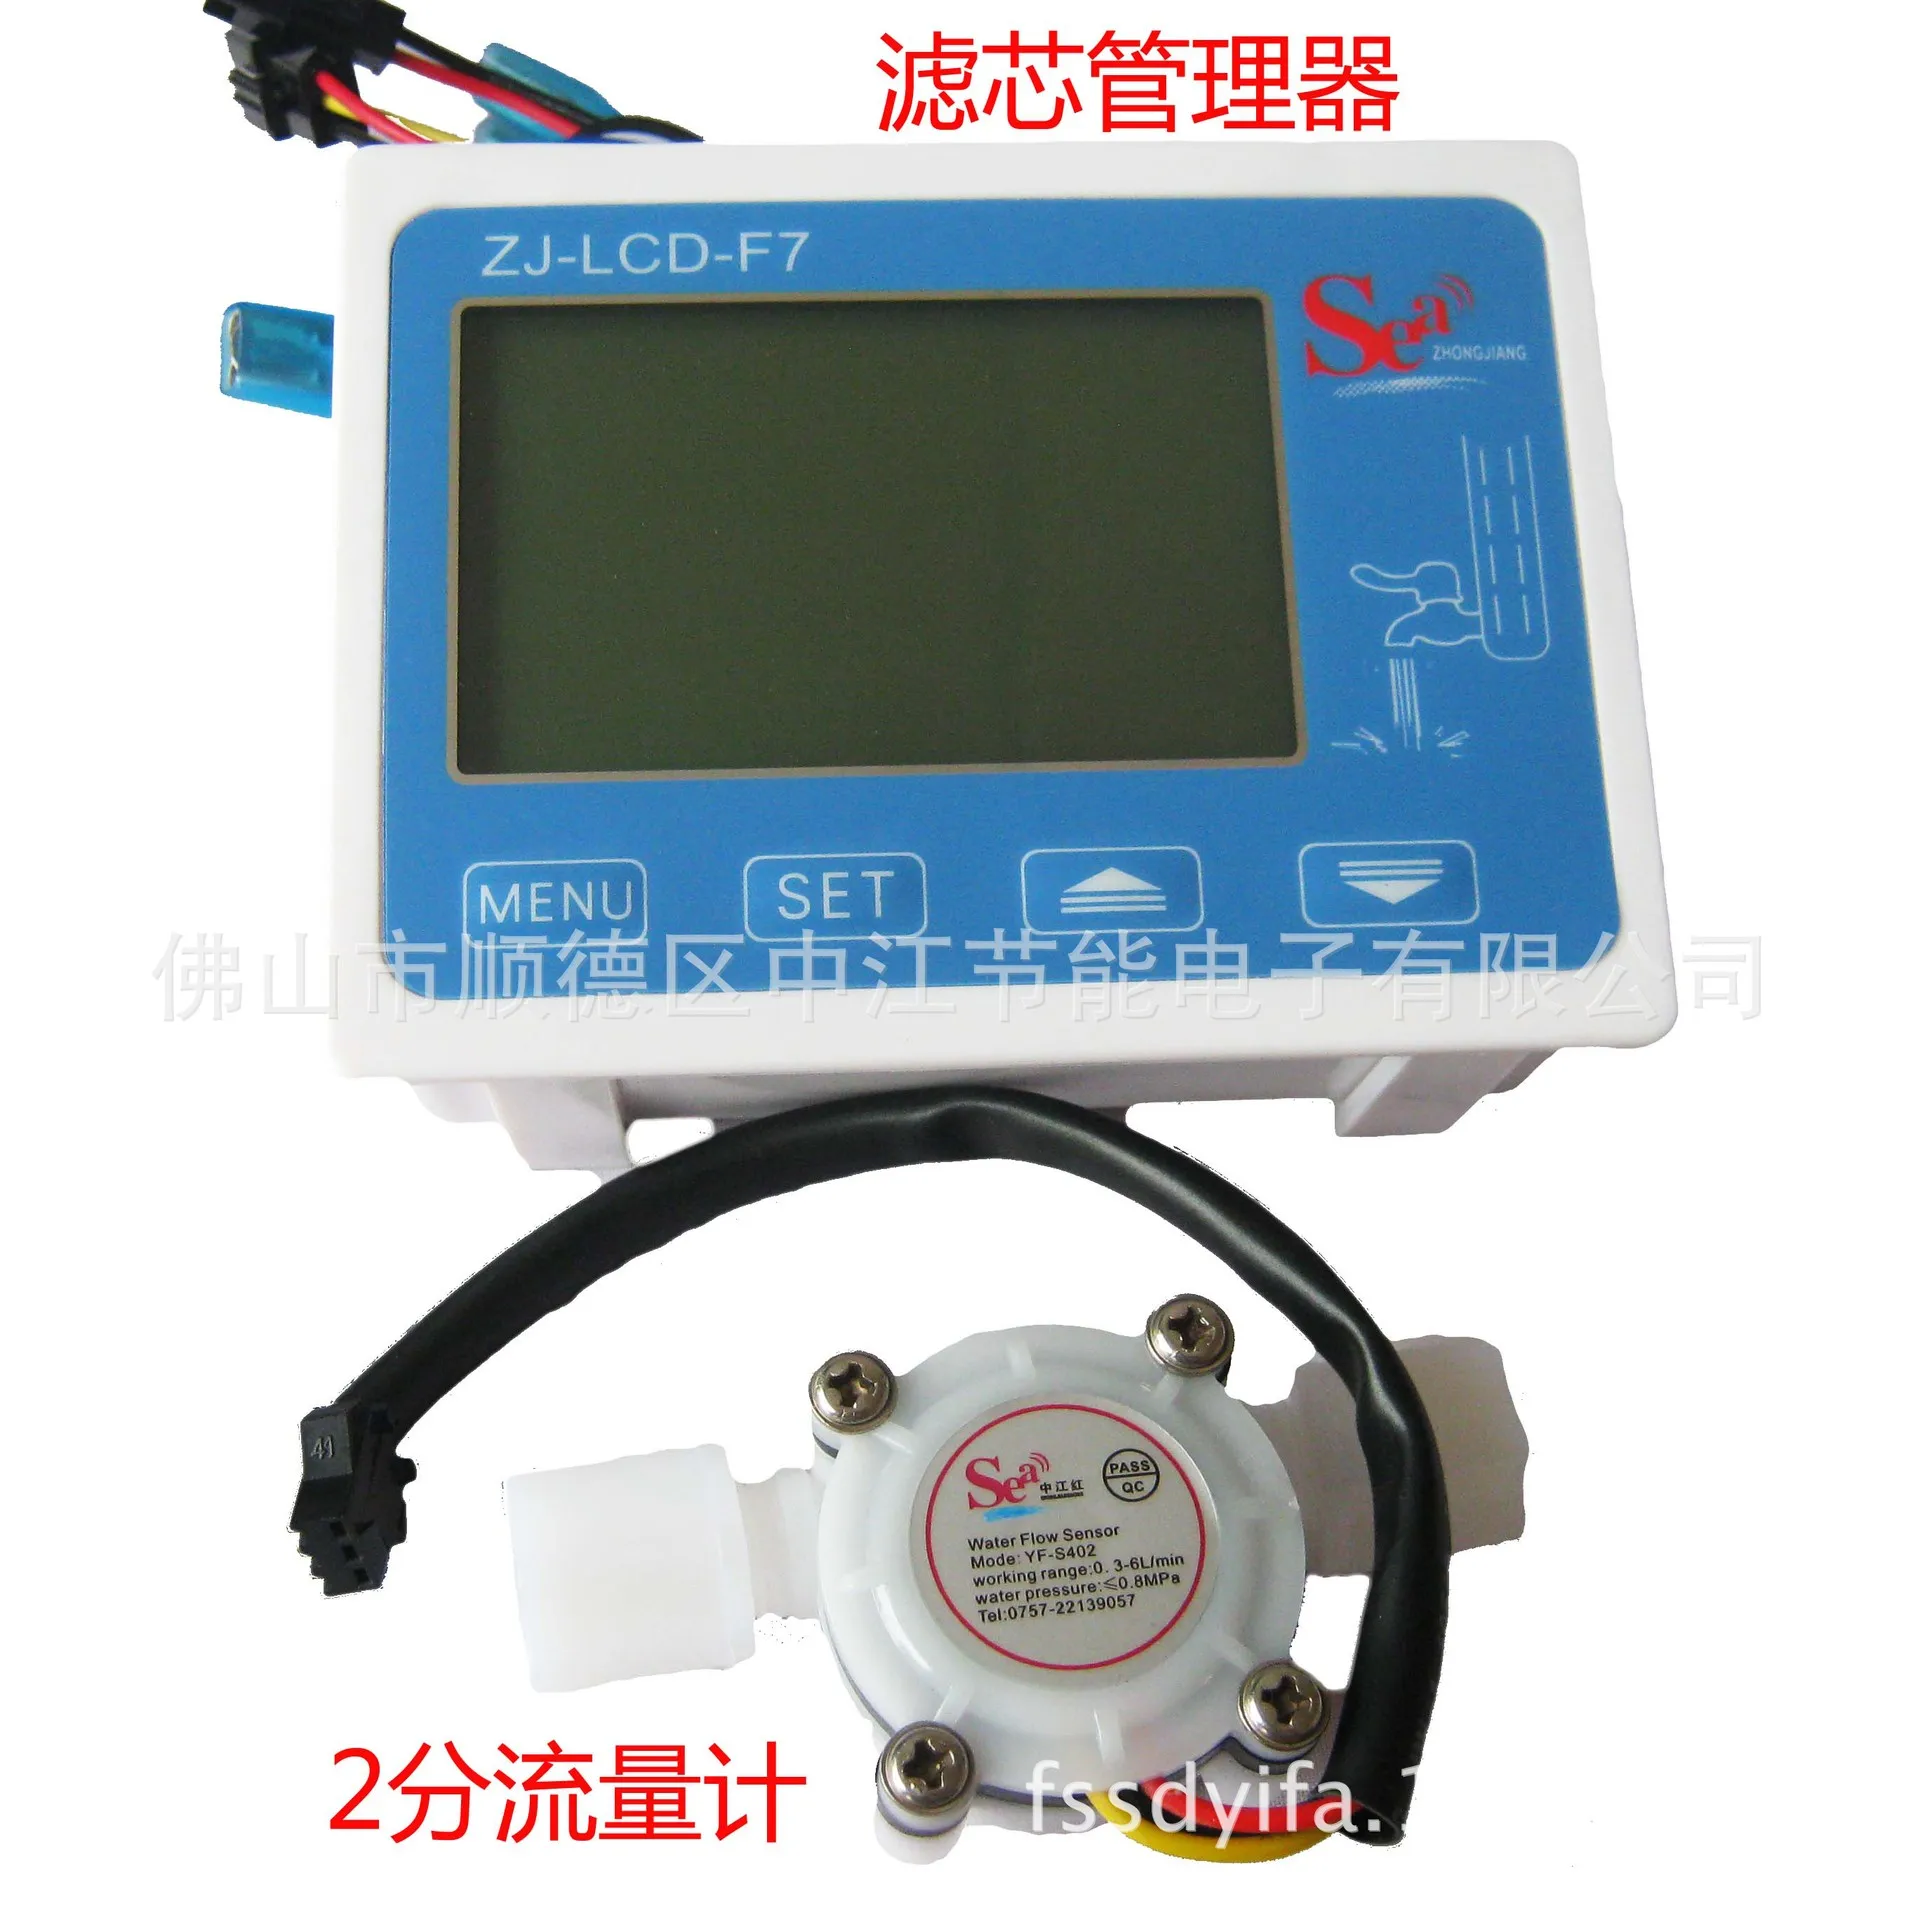 

RO pure water filter element manager, filter life detection alarm